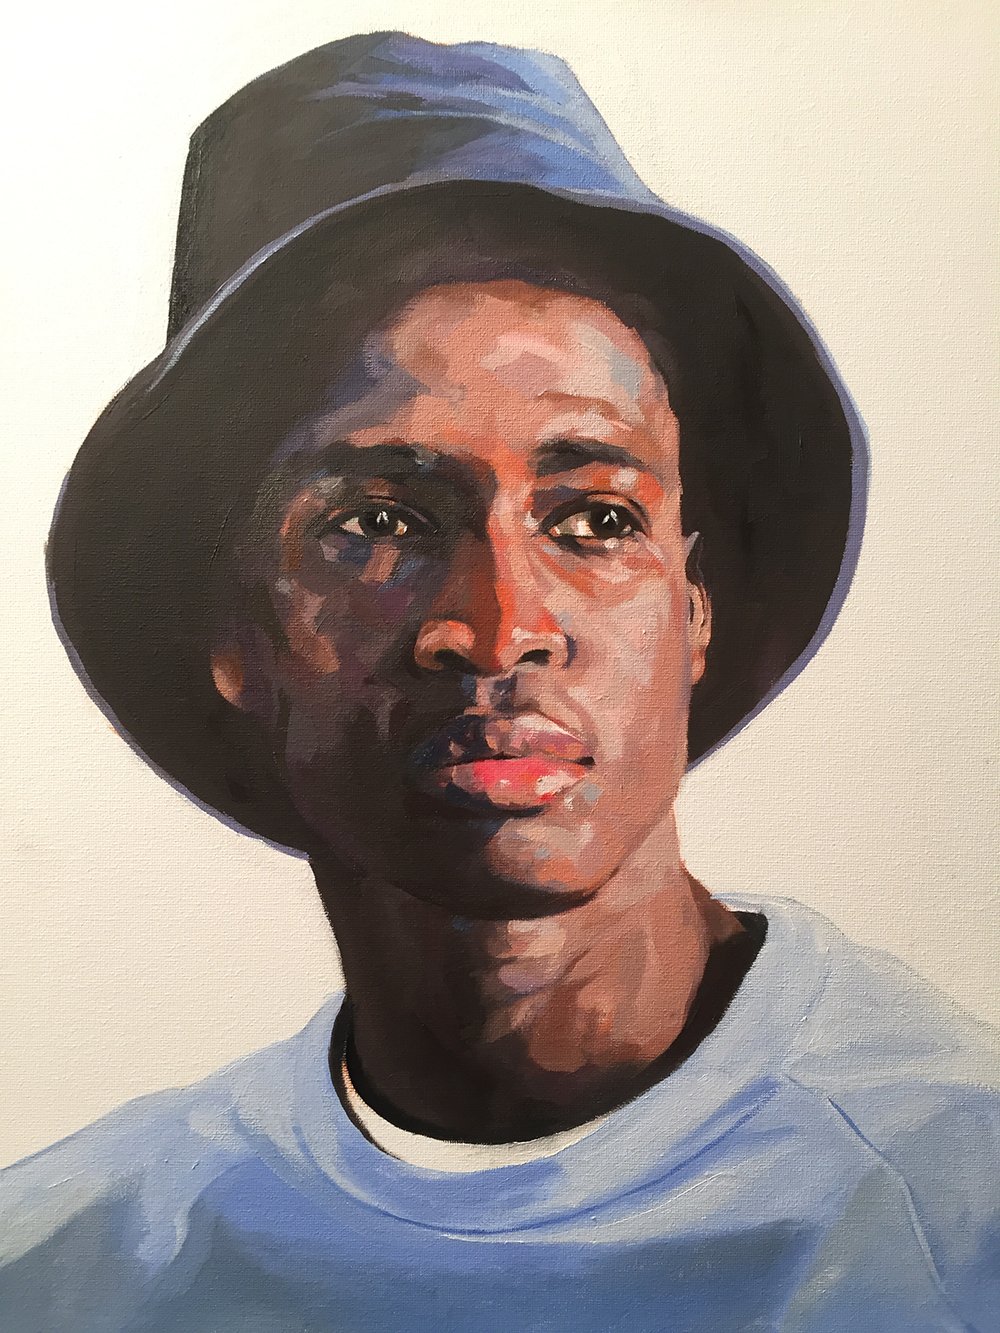 Steve with his hat. I really liked the faraway gaze, in contemplation. By Jonathan Ing Oil on Canvas Board 16x20Board